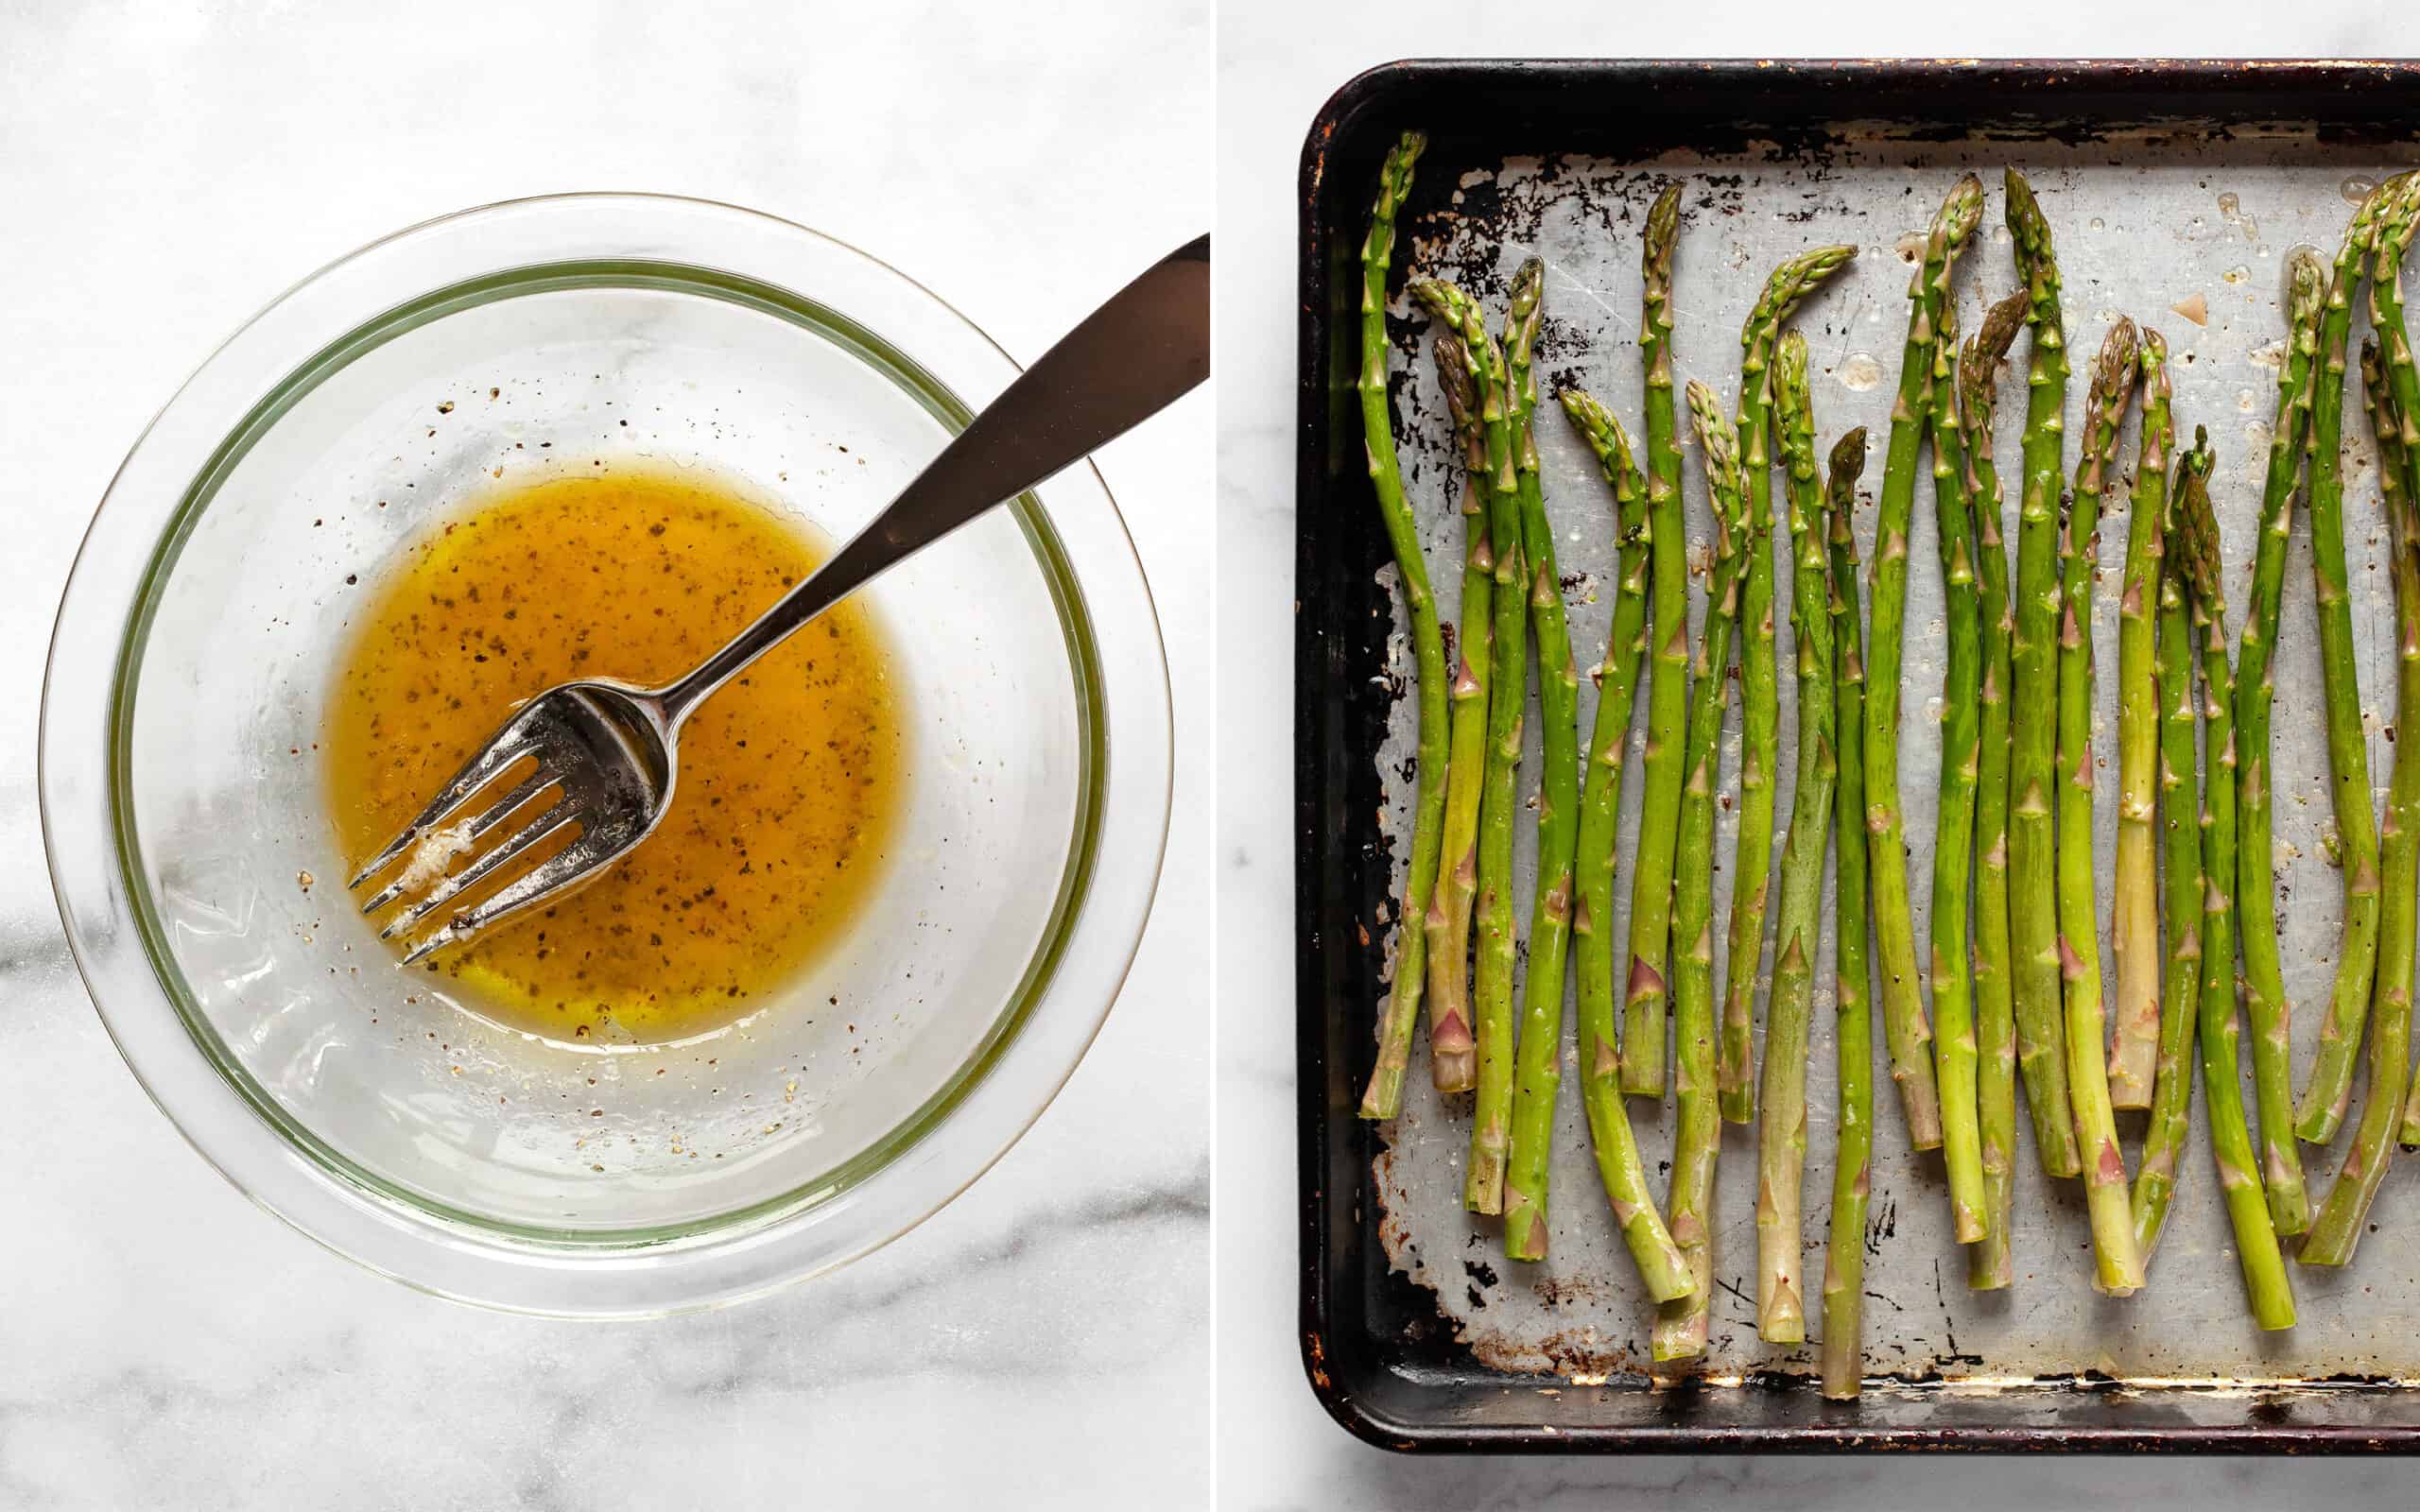 Whisk together the olive oil-lemon marinade in a bowl. Toss teh asparagus on the sheet pan in the marinade.